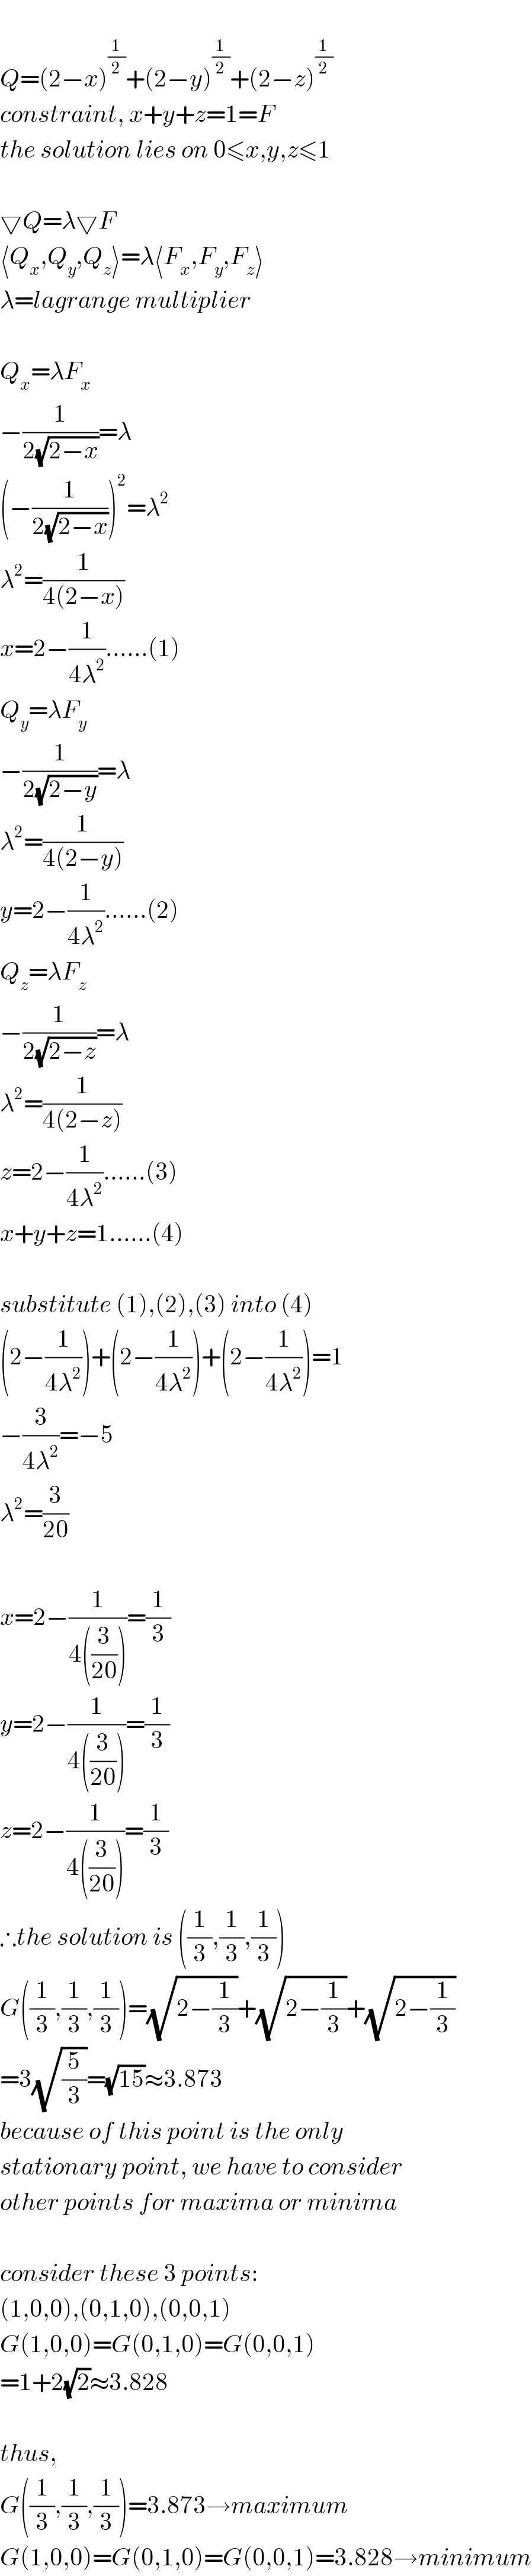   Q=(2−x)^(1/2) +(2−y)^(1/2) +(2−z)^(1/2)   constraint, x+y+z=1=F  the solution lies on 0≤x,y,z≤1    ▽Q=λ▽F  ⟨Q_x ,Q_y ,Q_z ⟩=λ⟨F_x ,F_y ,F_z ⟩  λ=lagrange multiplier    Q_x =λF_x   −(1/(2(√(2−x))))=λ  (−(1/(2(√(2−x)))))^2 =λ^2   λ^2 =(1/(4(2−x)))  x=2−(1/(4λ^2 ))......(1)  Q_y =λF_y   −(1/(2(√(2−y))))=λ  λ^2 =(1/(4(2−y)))  y=2−(1/(4λ^2 ))......(2)  Q_z =λF_z   −(1/(2(√(2−z))))=λ  λ^2 =(1/(4(2−z)))  z=2−(1/(4λ^2 ))......(3)  x+y+z=1......(4)    substitute (1),(2),(3) into (4)  (2−(1/(4λ^2 )))+(2−(1/(4λ^2 )))+(2−(1/(4λ^2 )))=1  −(3/(4λ^2 ))=−5  λ^2 =(3/(20))    x=2−(1/(4((3/(20)))))=(1/3)  y=2−(1/(4((3/(20)))))=(1/3)  z=2−(1/(4((3/(20)))))=(1/3)  ∴the solution is ((1/3),(1/3),(1/3))  G((1/3),(1/3),(1/3))=(√(2−(1/3)))+(√(2−(1/3)))+(√(2−(1/3)))  =3(√(5/3))=(√(15))≈3.873  because of this point is the only  stationary point, we have to consider  other points for maxima or minima    consider these 3 points:  (1,0,0),(0,1,0),(0,0,1)  G(1,0,0)=G(0,1,0)=G(0,0,1)  =1+2(√2)≈3.828    thus,  G((1/3),(1/3),(1/3))=3.873→maximum  G(1,0,0)=G(0,1,0)=G(0,0,1)=3.828→minimum  